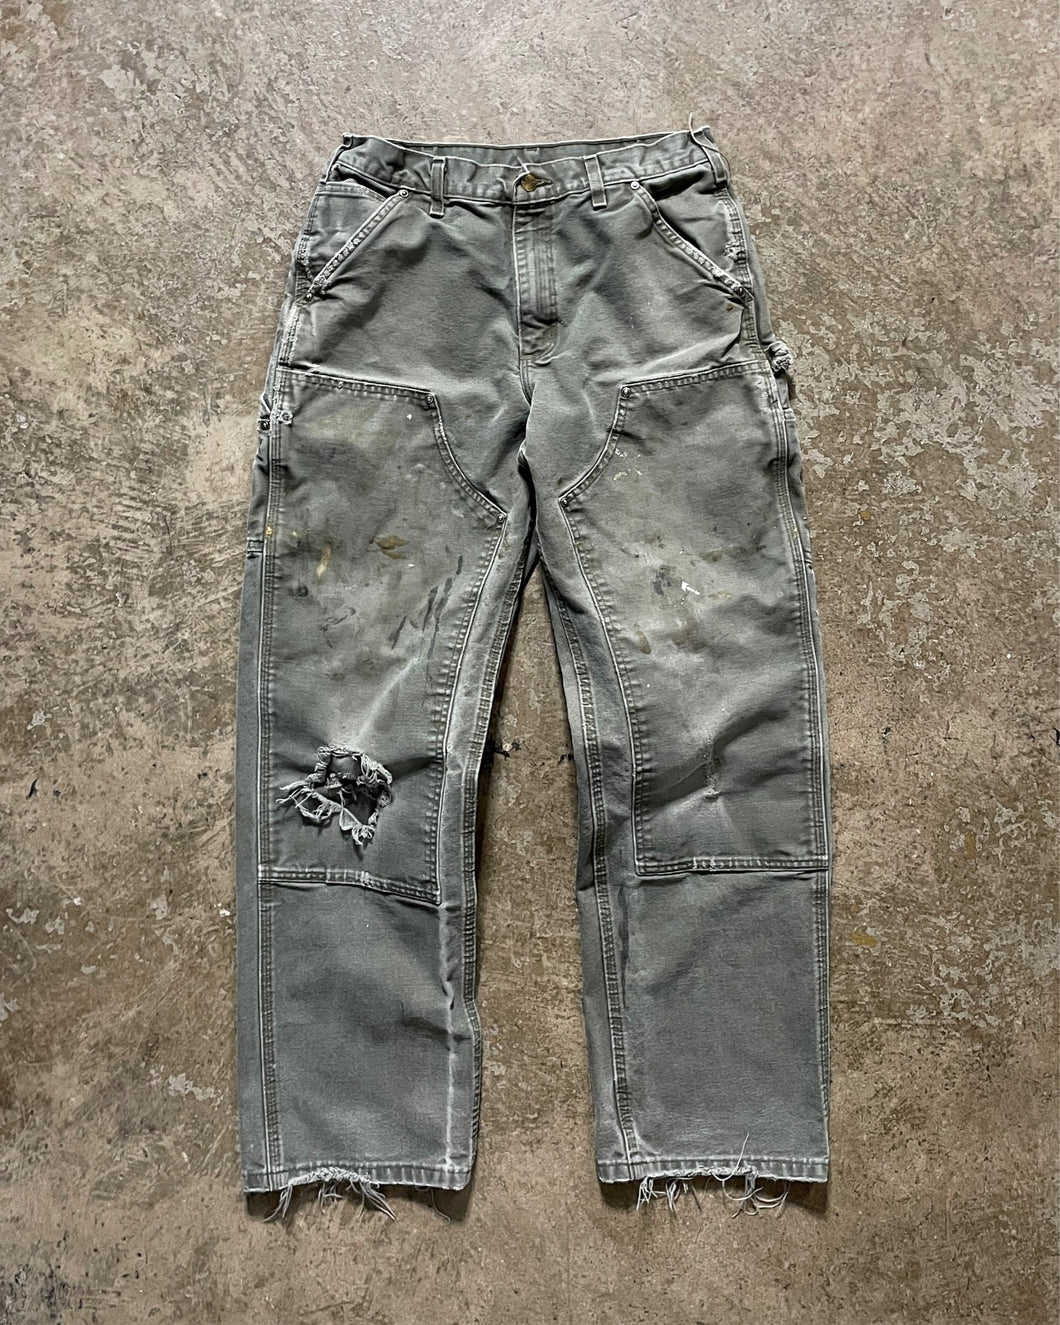 CARHARTT DISTRESSED & FADED OLIVE GREEN DOUBLE KNEE PANTS